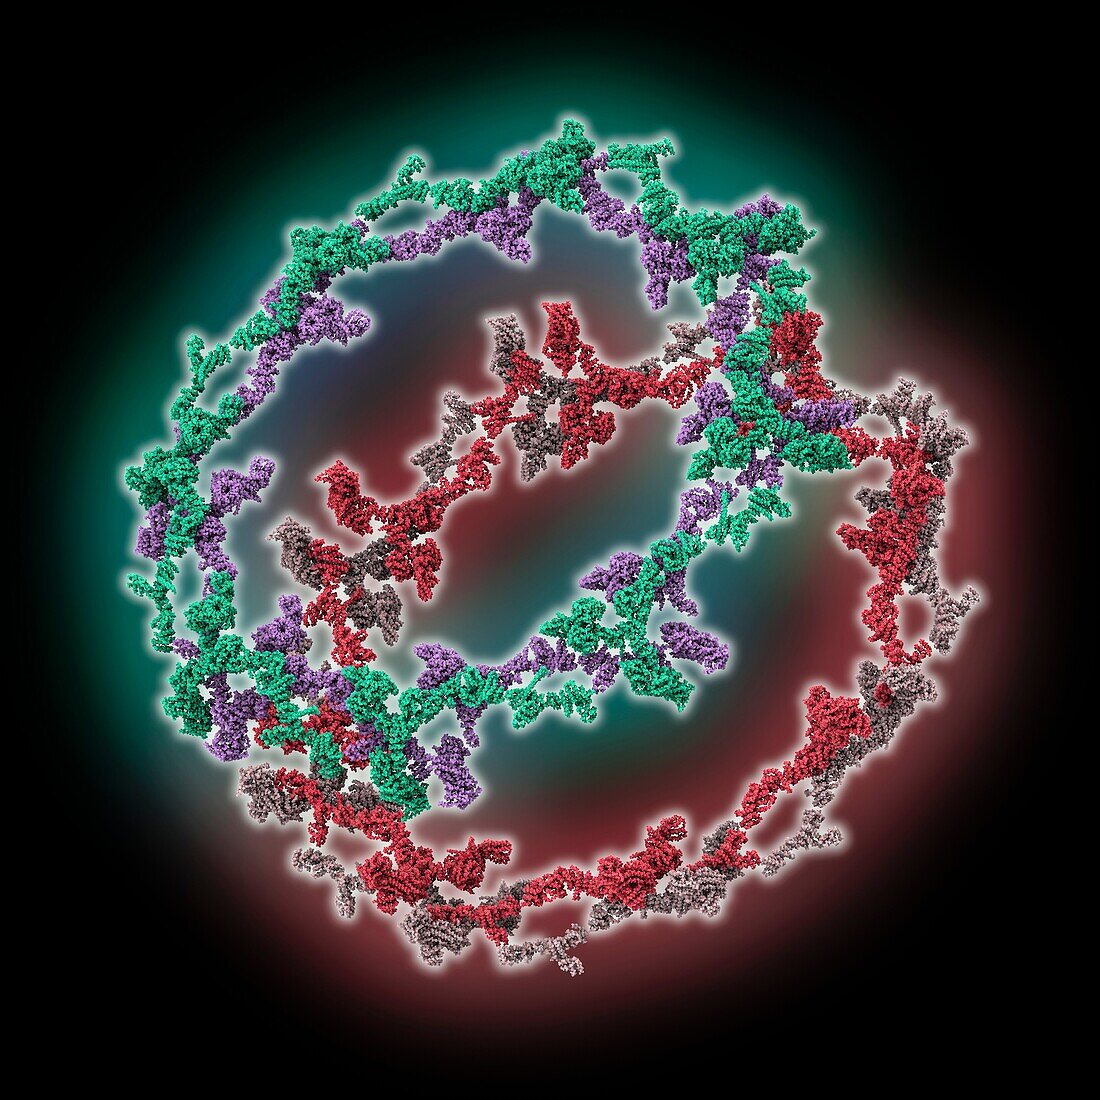 Outer rings of the human nuclear pore, molecular model